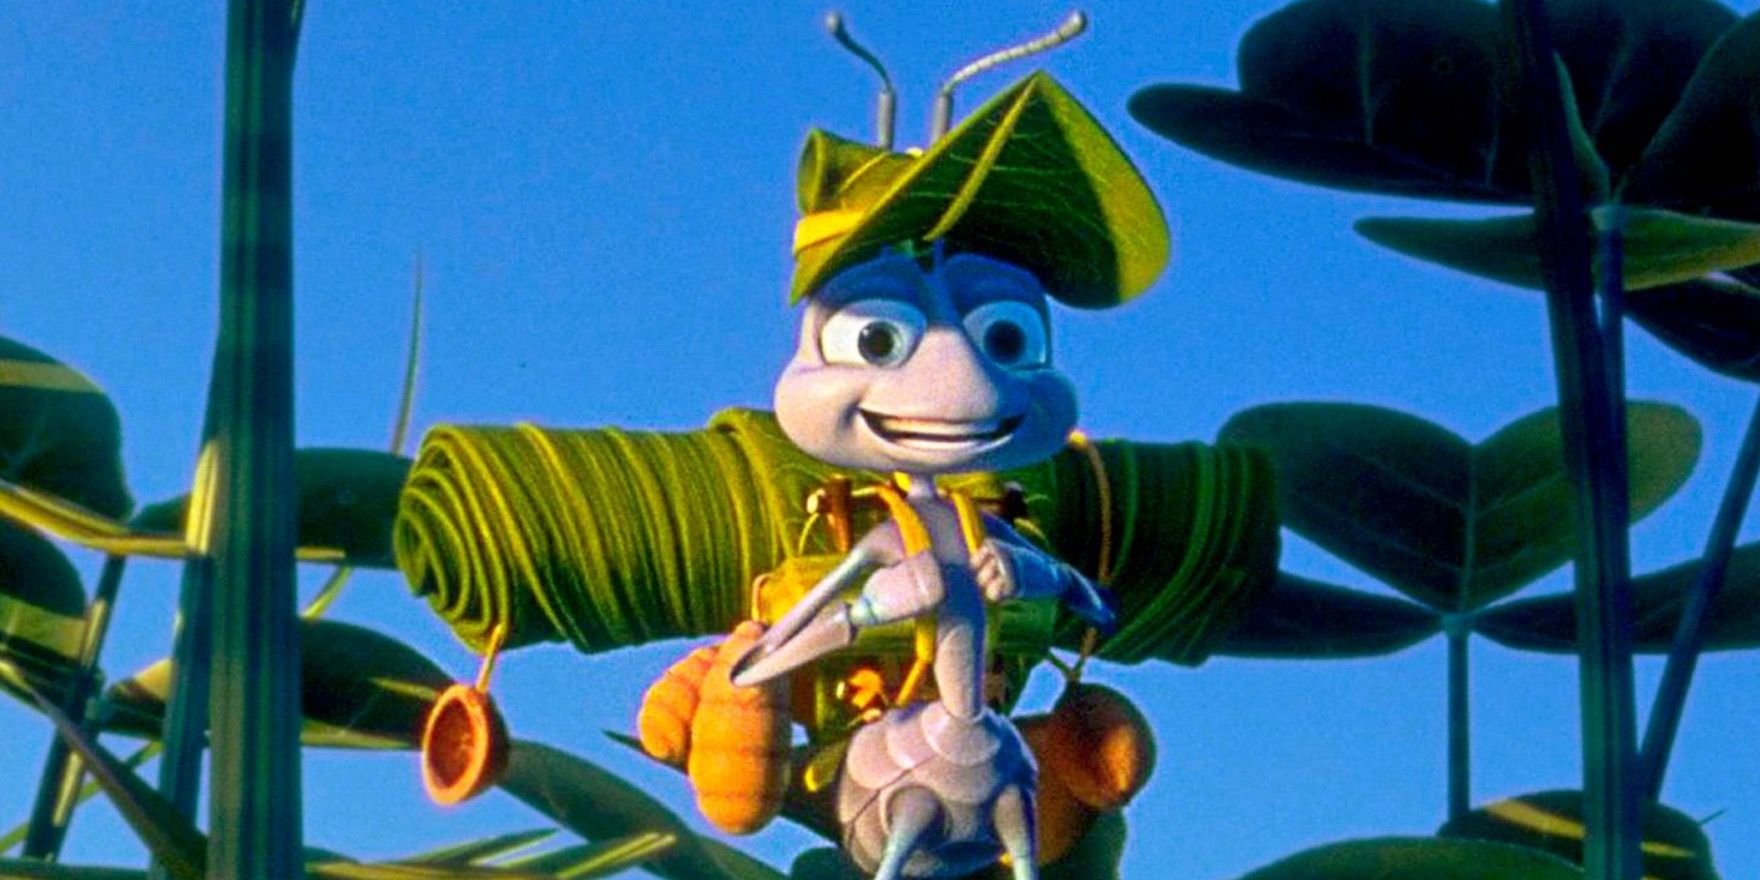 Flik Prepares To Leave On His Quest To Find Help Against The Grasshoppers In A Bug's Life